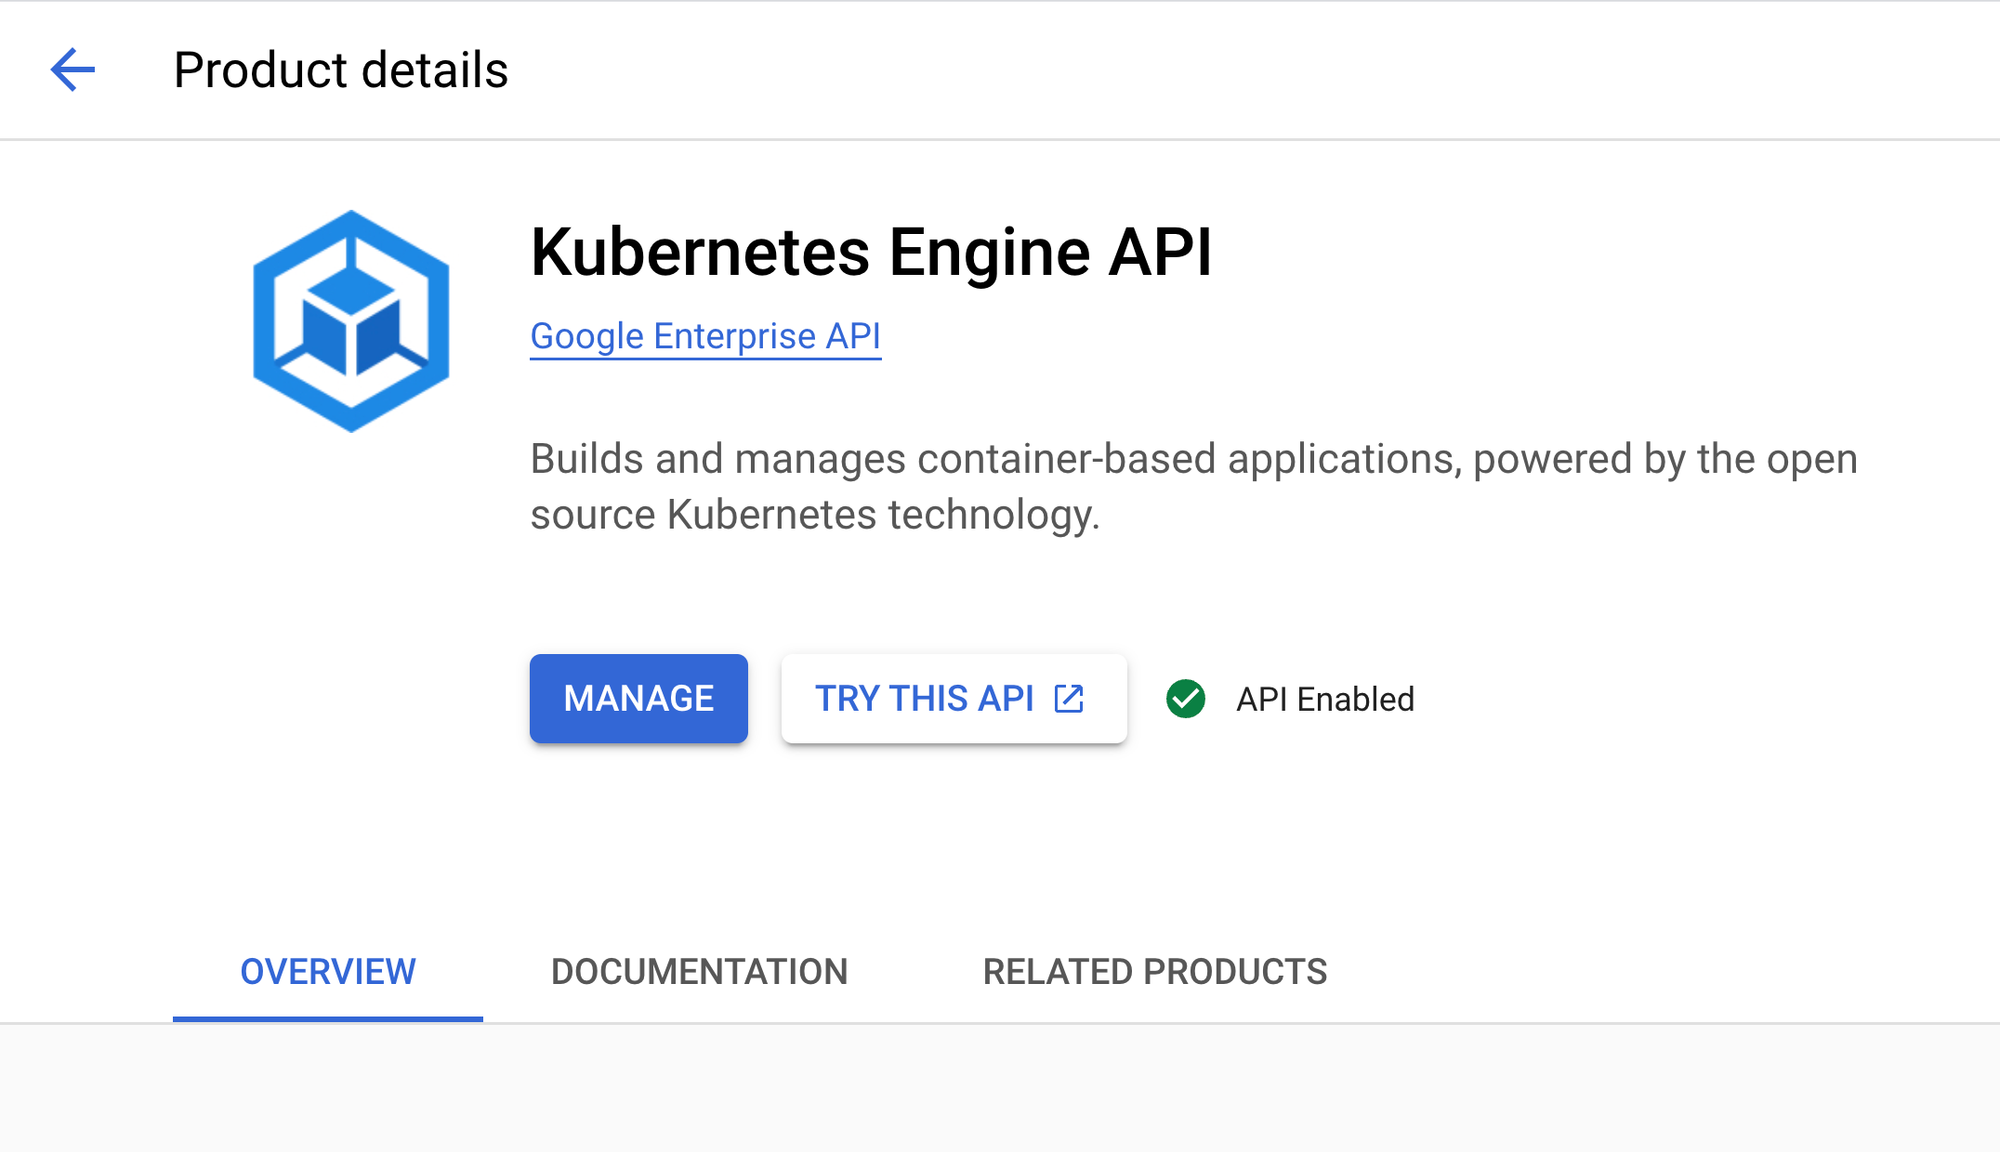 Deploying an App to Google Kubernetes Engine with Codegiant